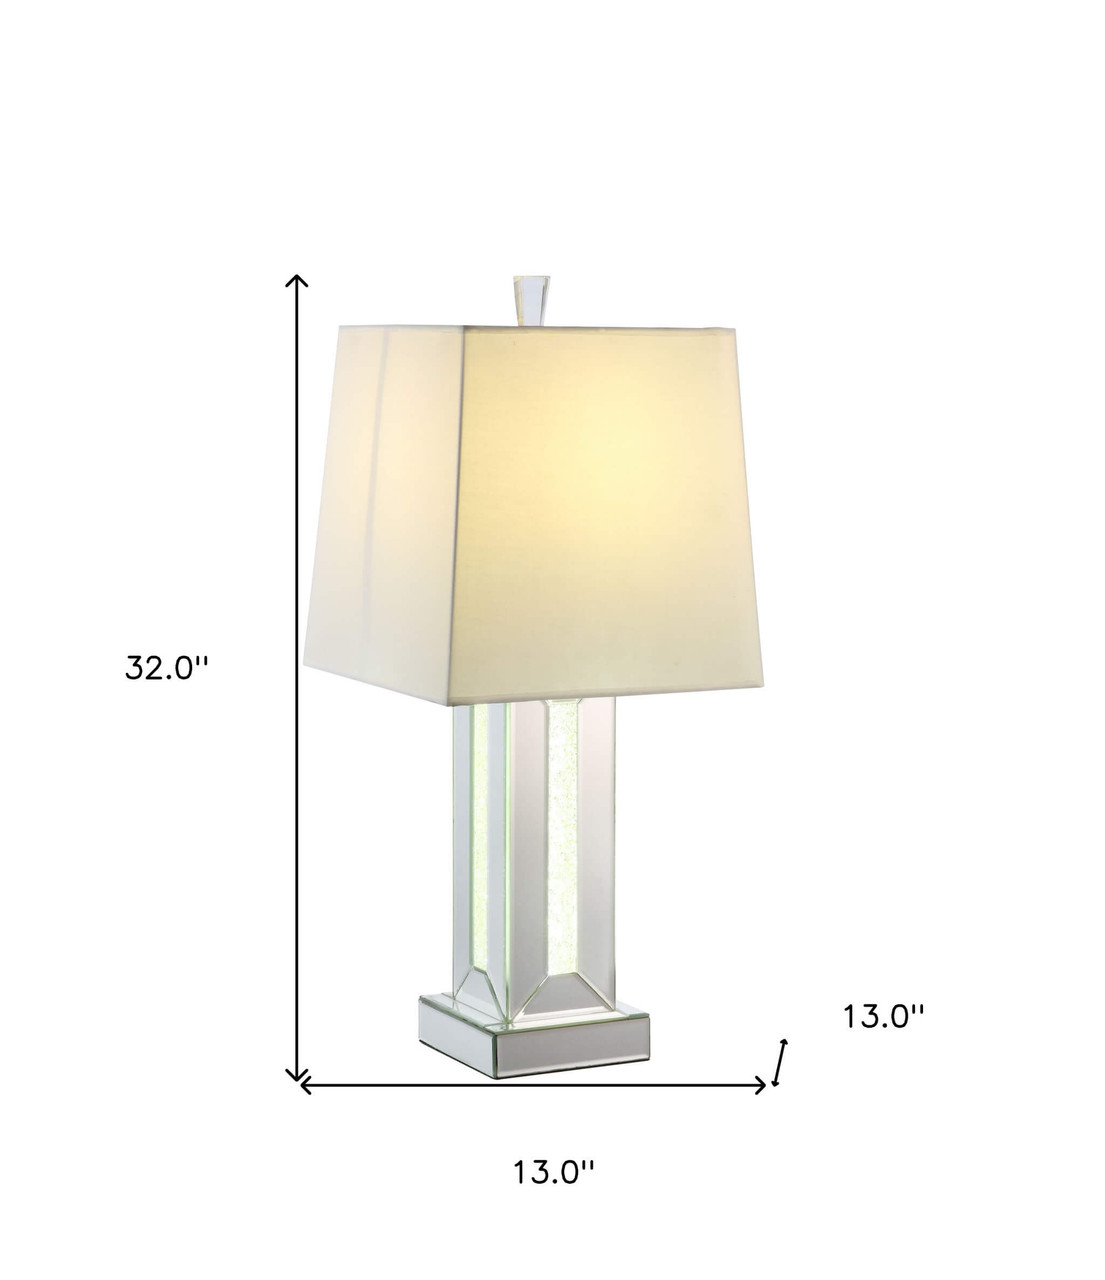 32" Mirrored Glass and Faux Crystal Table Lamp With White Square Shade - Chicken Pieces